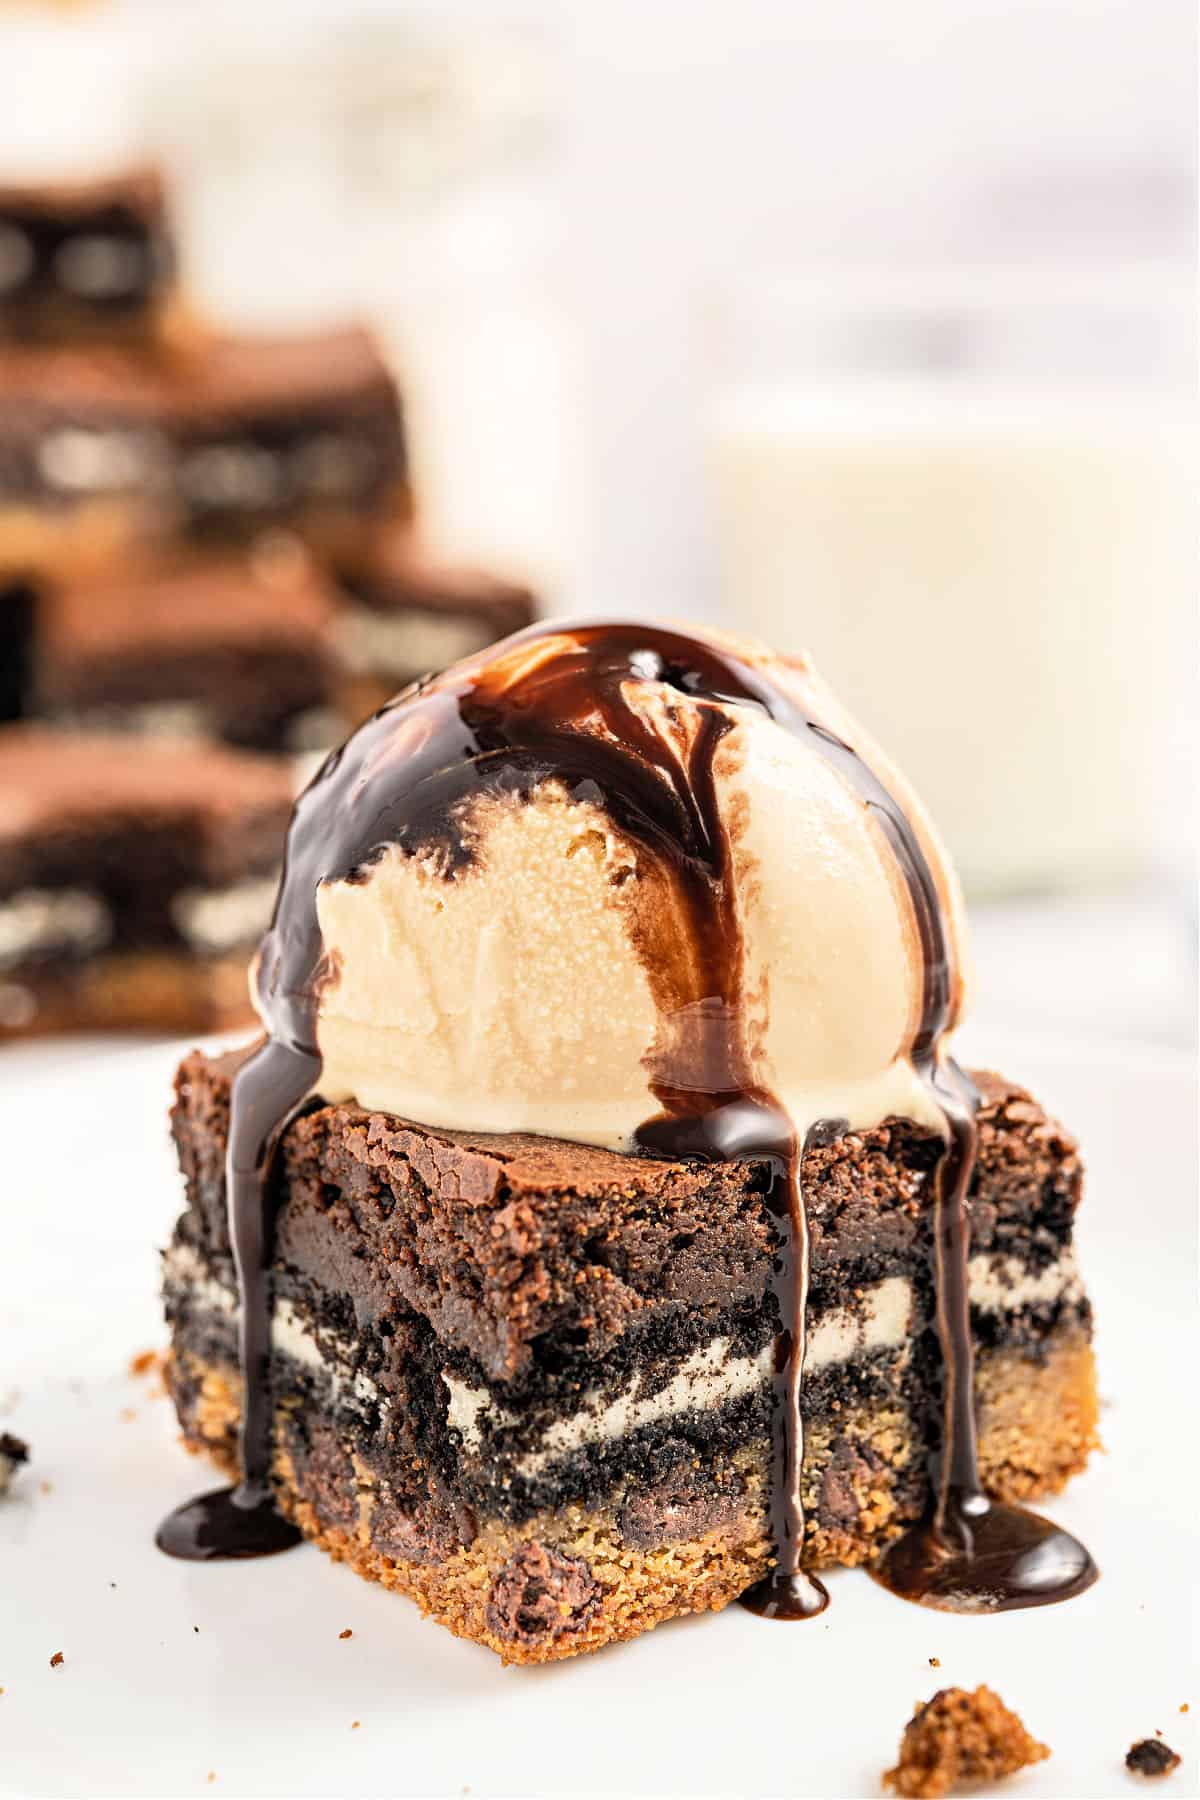 Layered dessert of cookie, oreo, and brownies topped with ice cream and hot fudge.